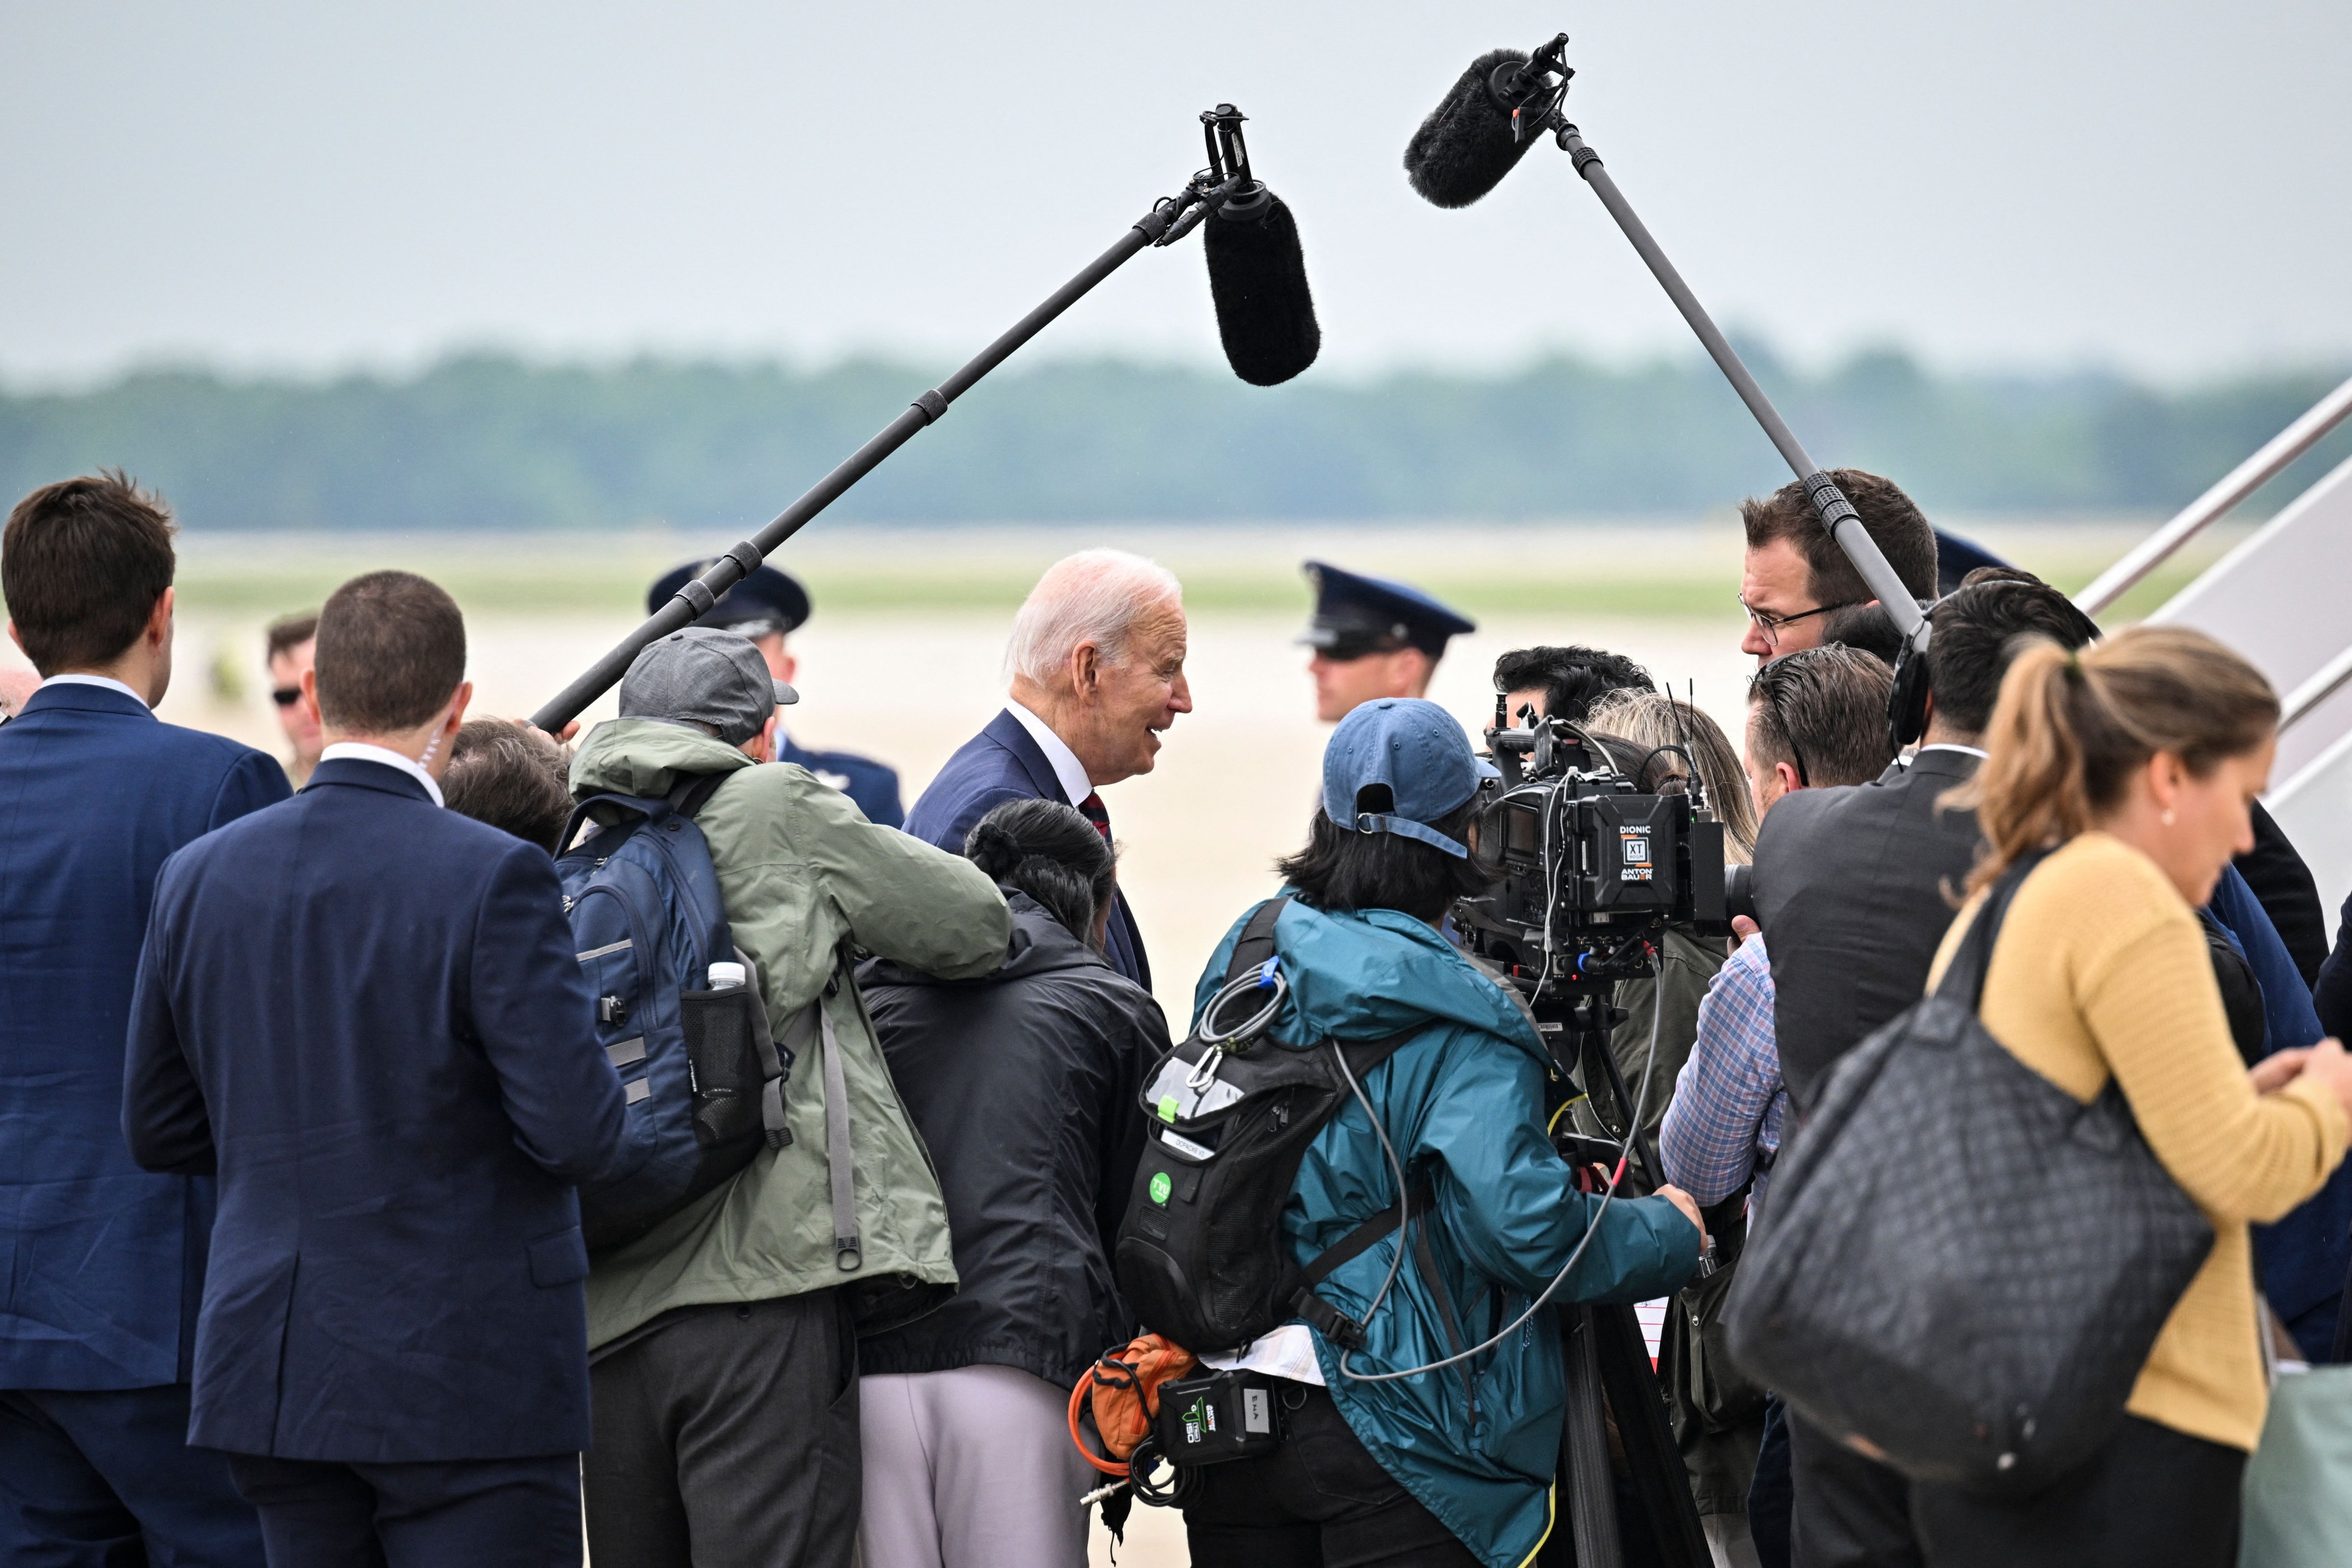 US President Joe Biden makes his way to board Air Force One before departing from Joint Base Andrews in Maryland on May 13, 2023. Biden is heading to Rehoboth Beach, Delaware to spend the weekend at his beach house. (Photo by Mandel Ngan–AFP via Getty Images)